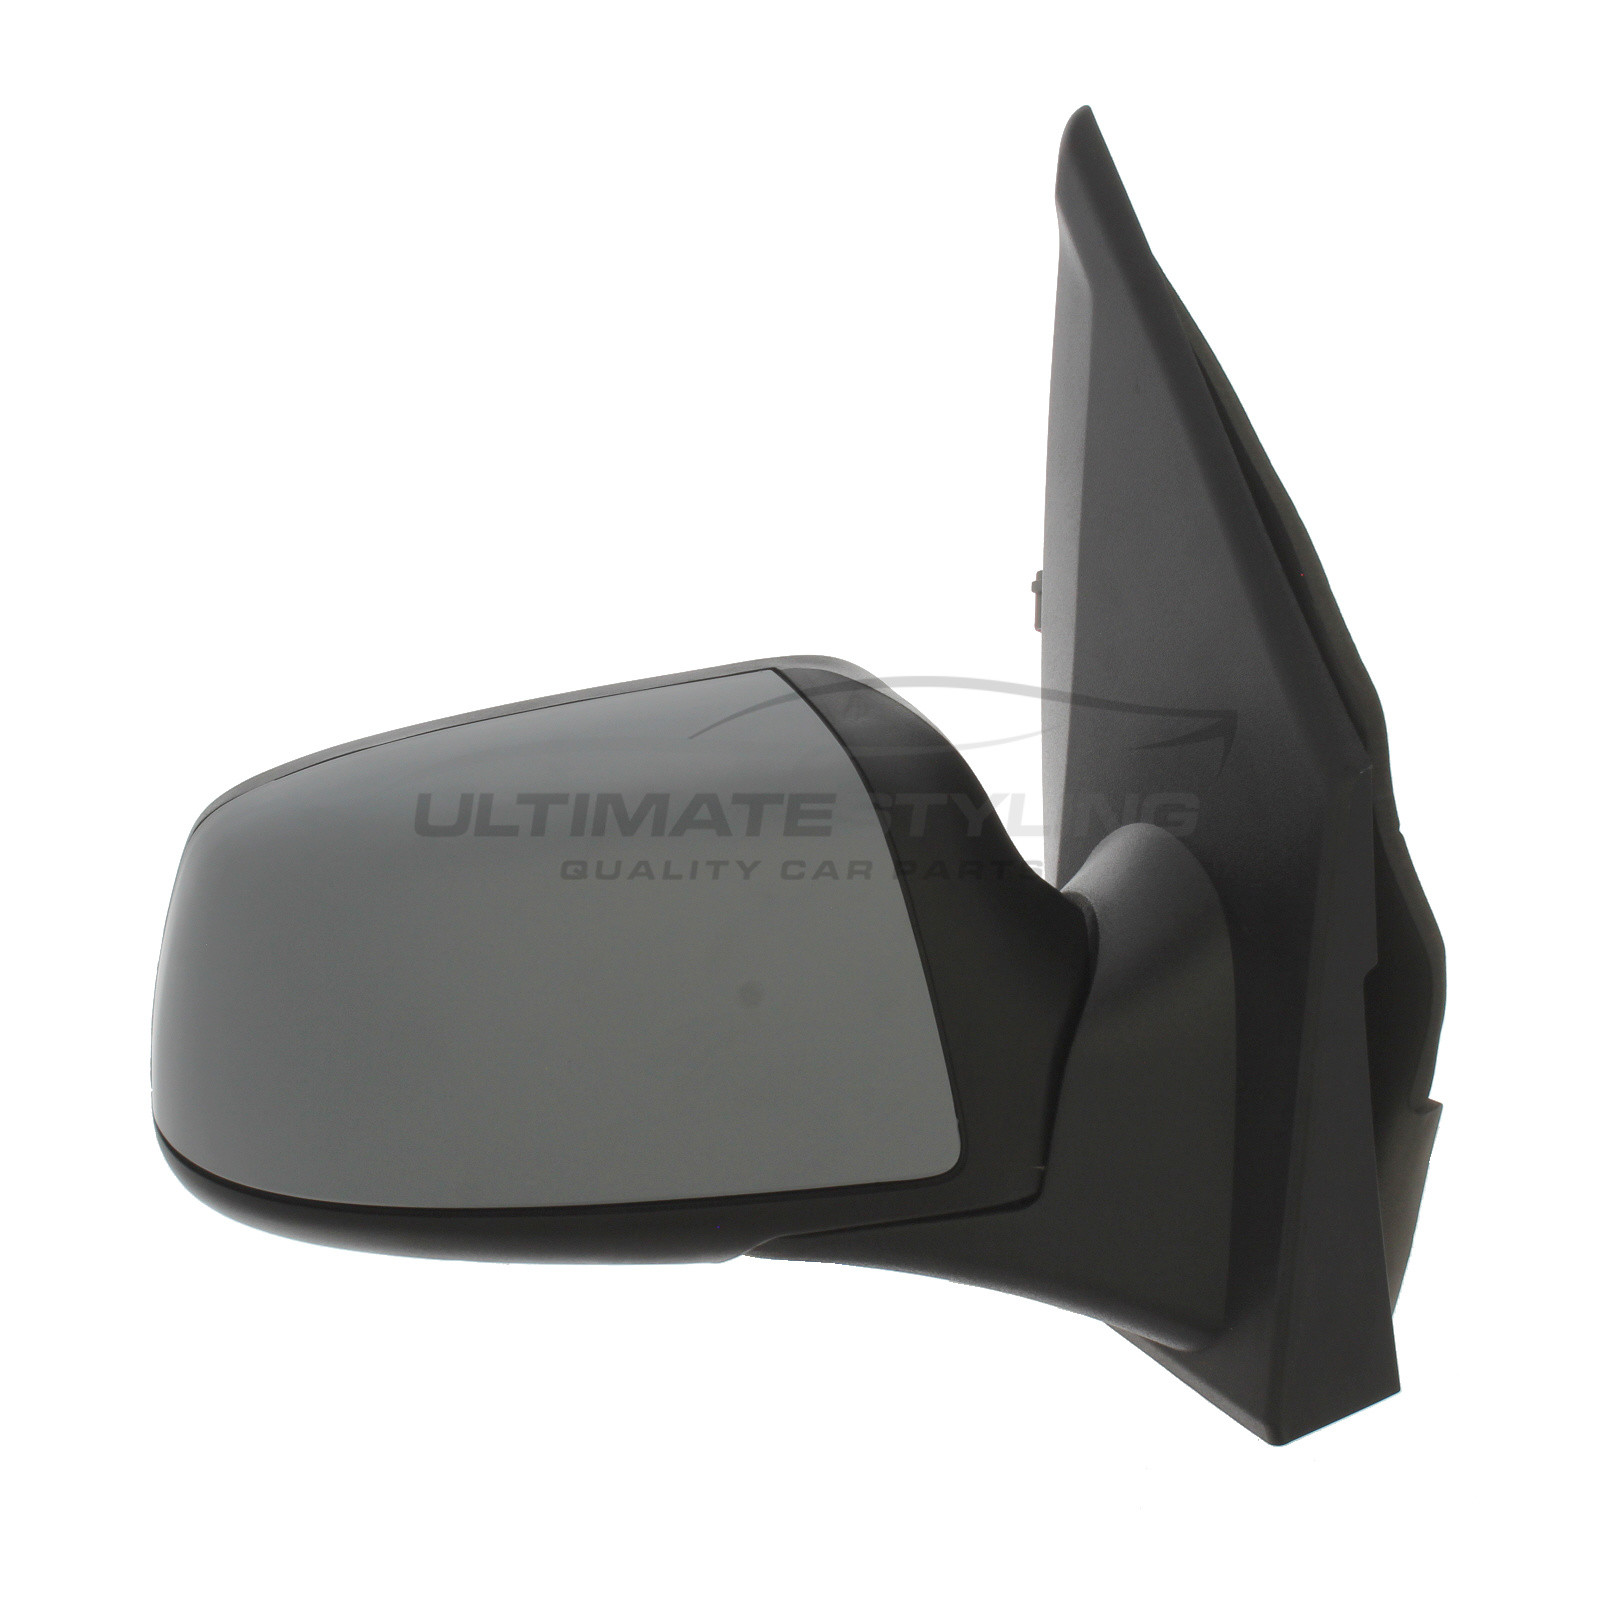 Ford Fusion Wing Mirror / Door Mirror - Drivers Side (RH) - Electric adjustment - Heated Glass - Primed